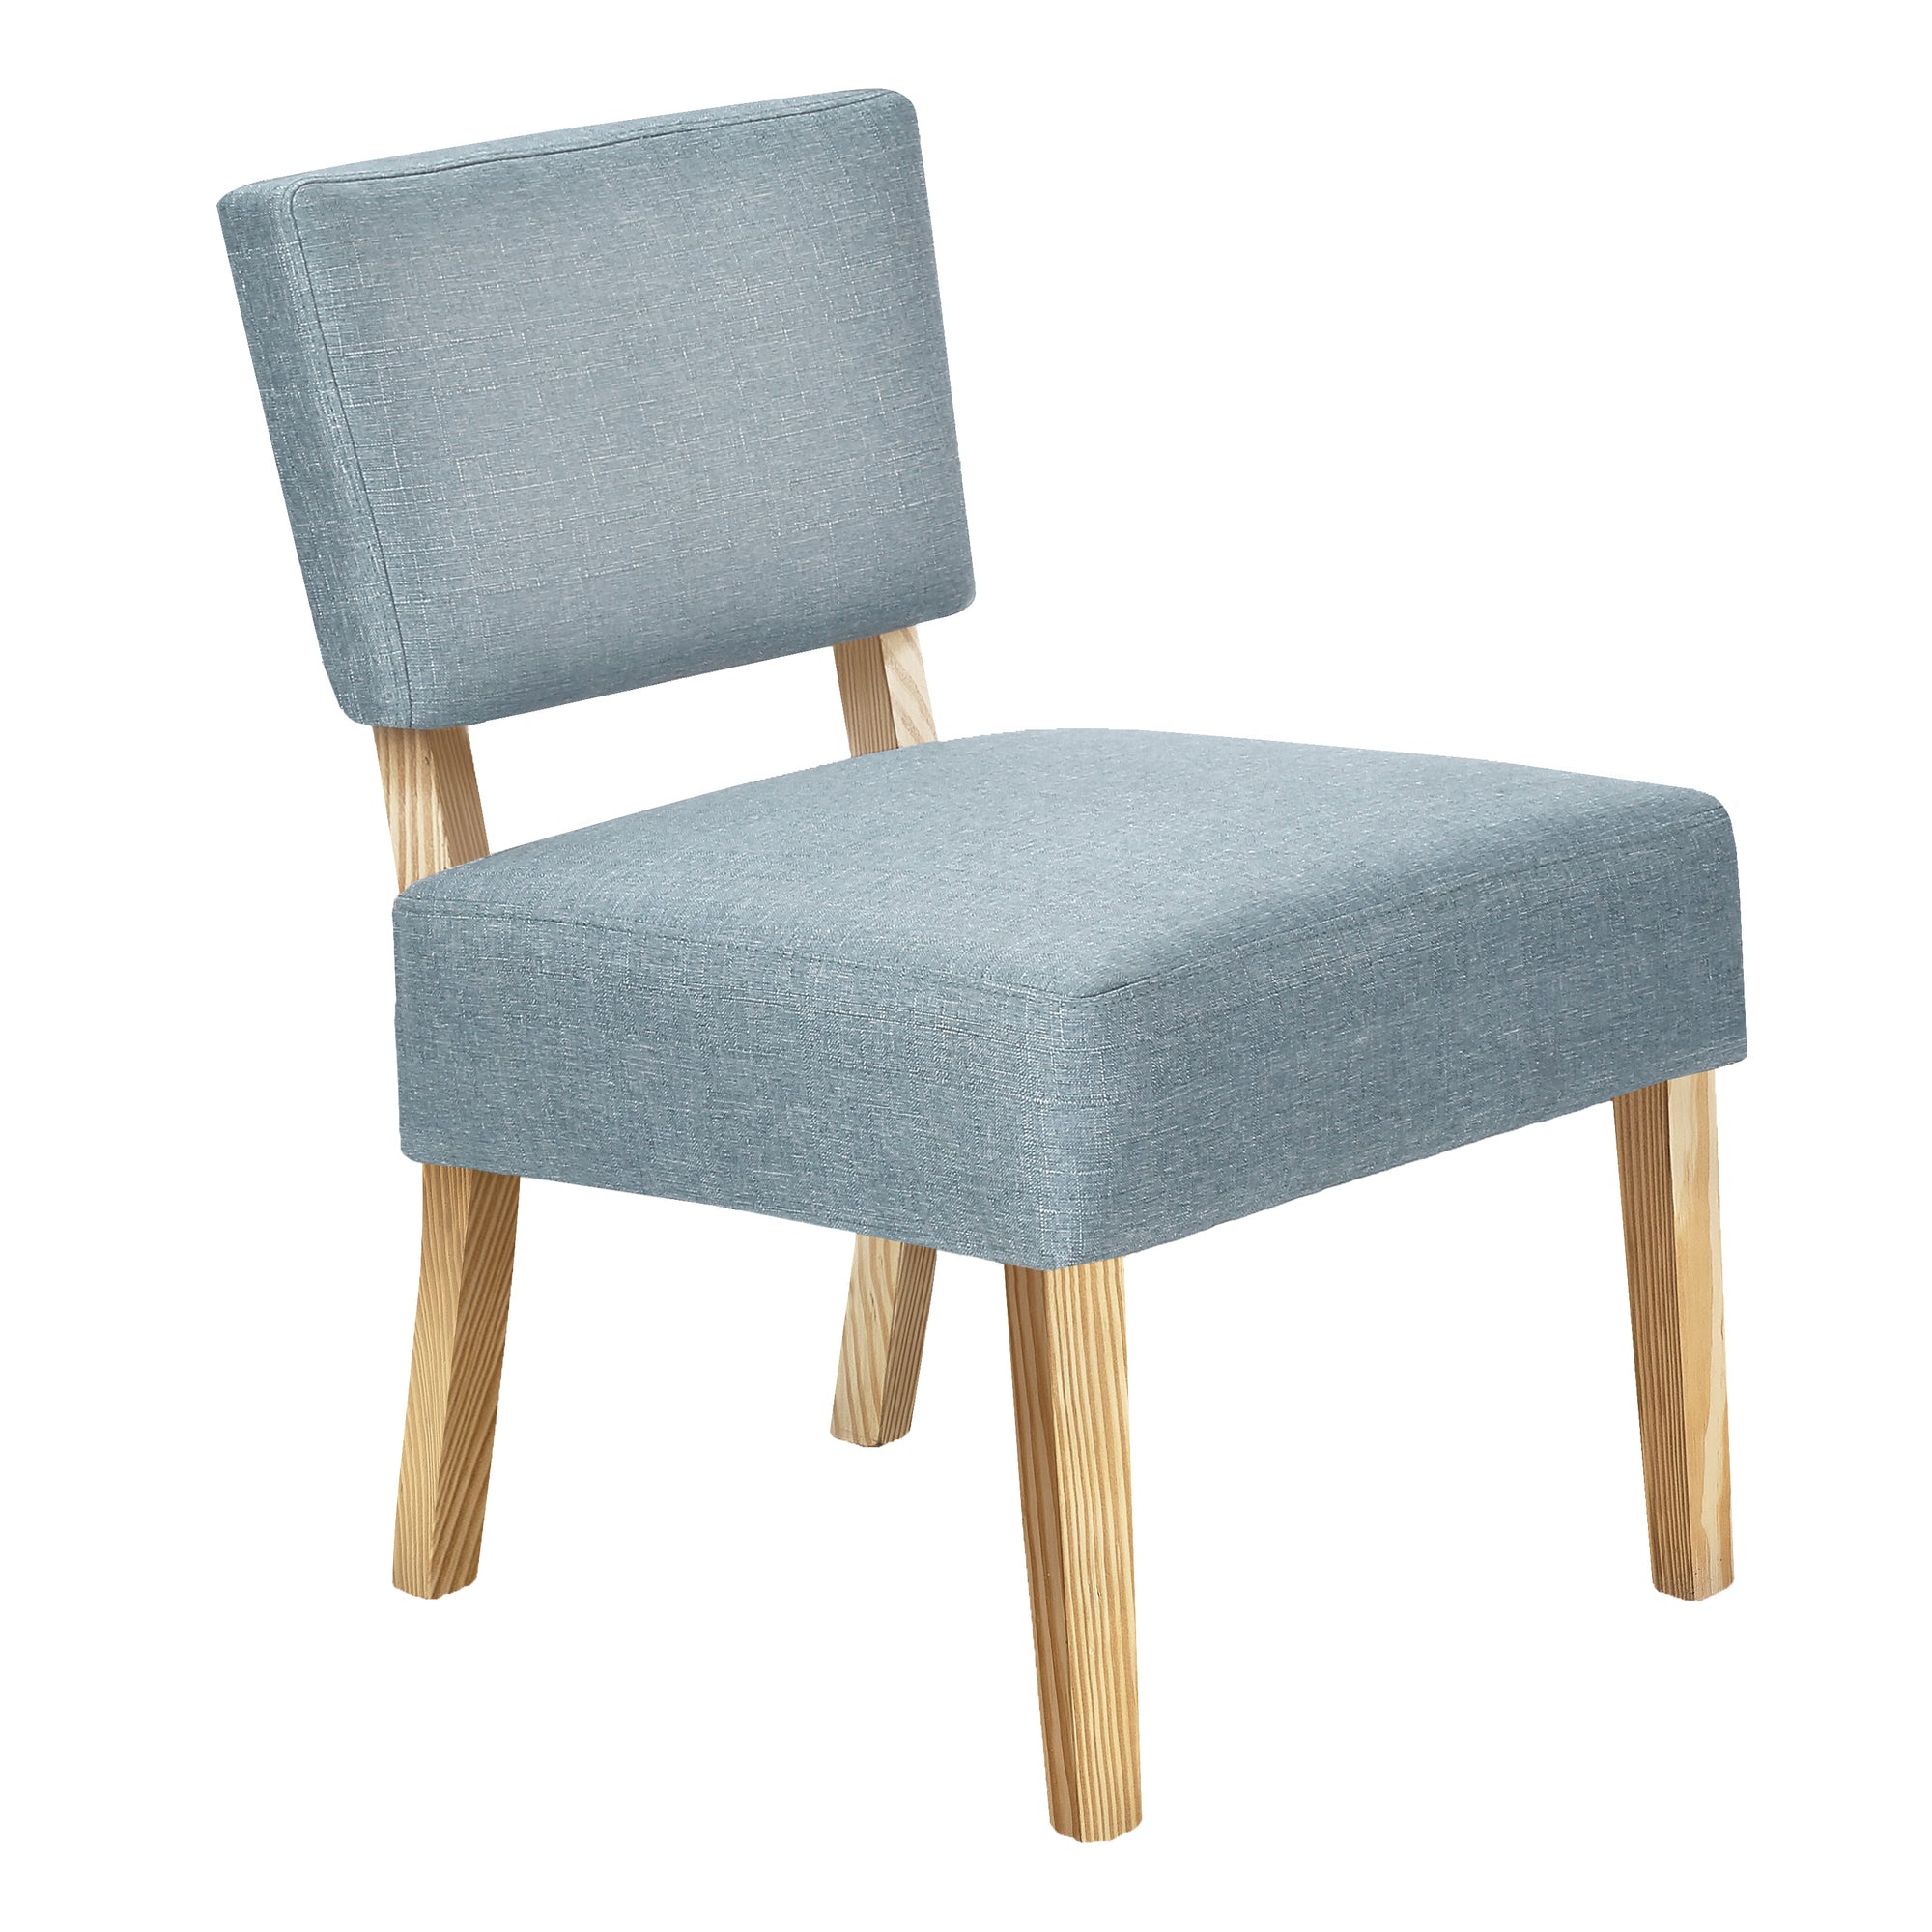 Accent Chair - Light Blue Fabric / Natural Wood Legs